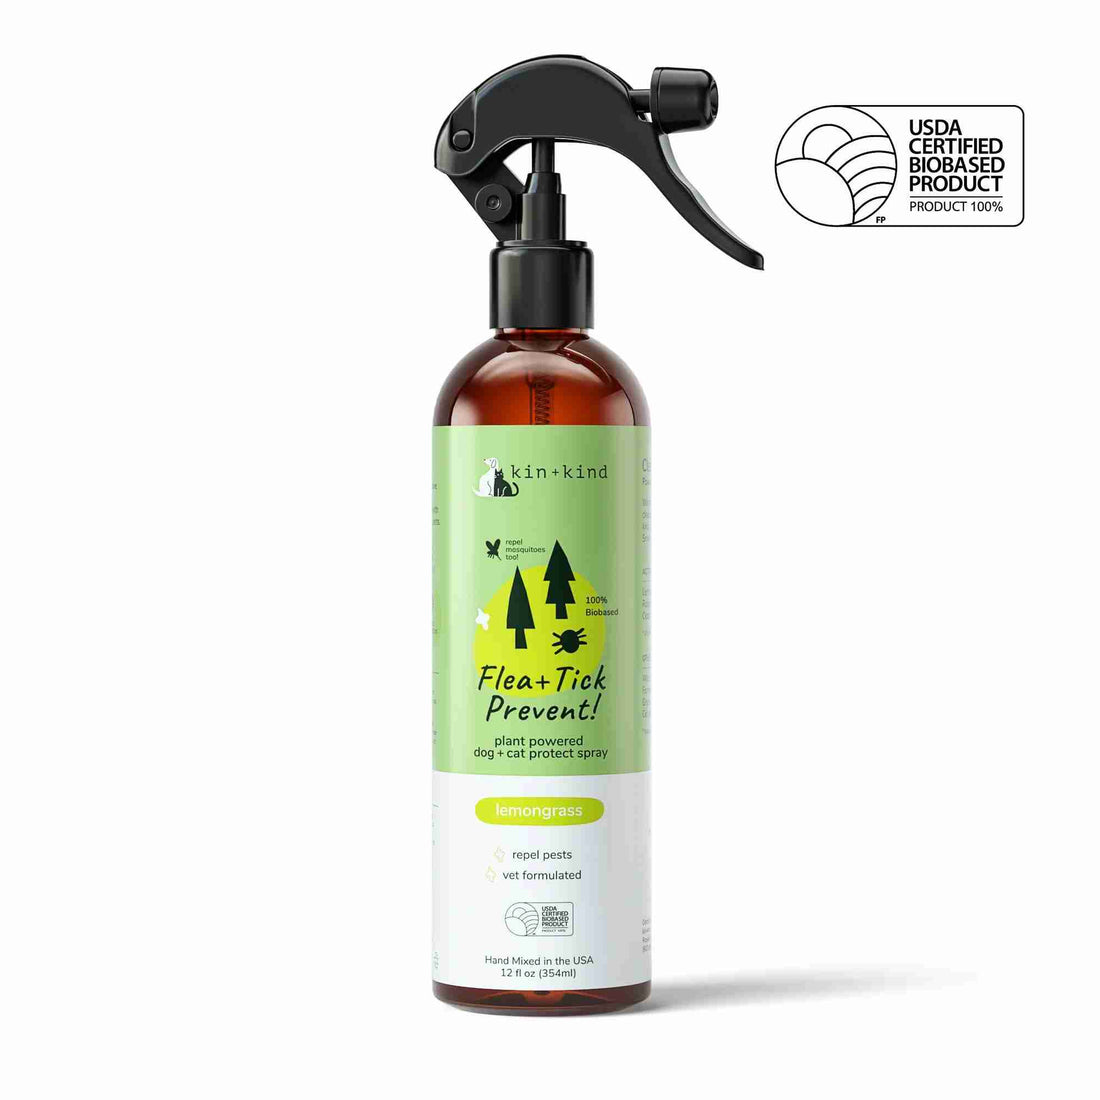 Flea and Tick Prevent - Kin and Kind Front of bottle 12 fl oz for dog and cat lemongrass scent repel pest and vet formulated